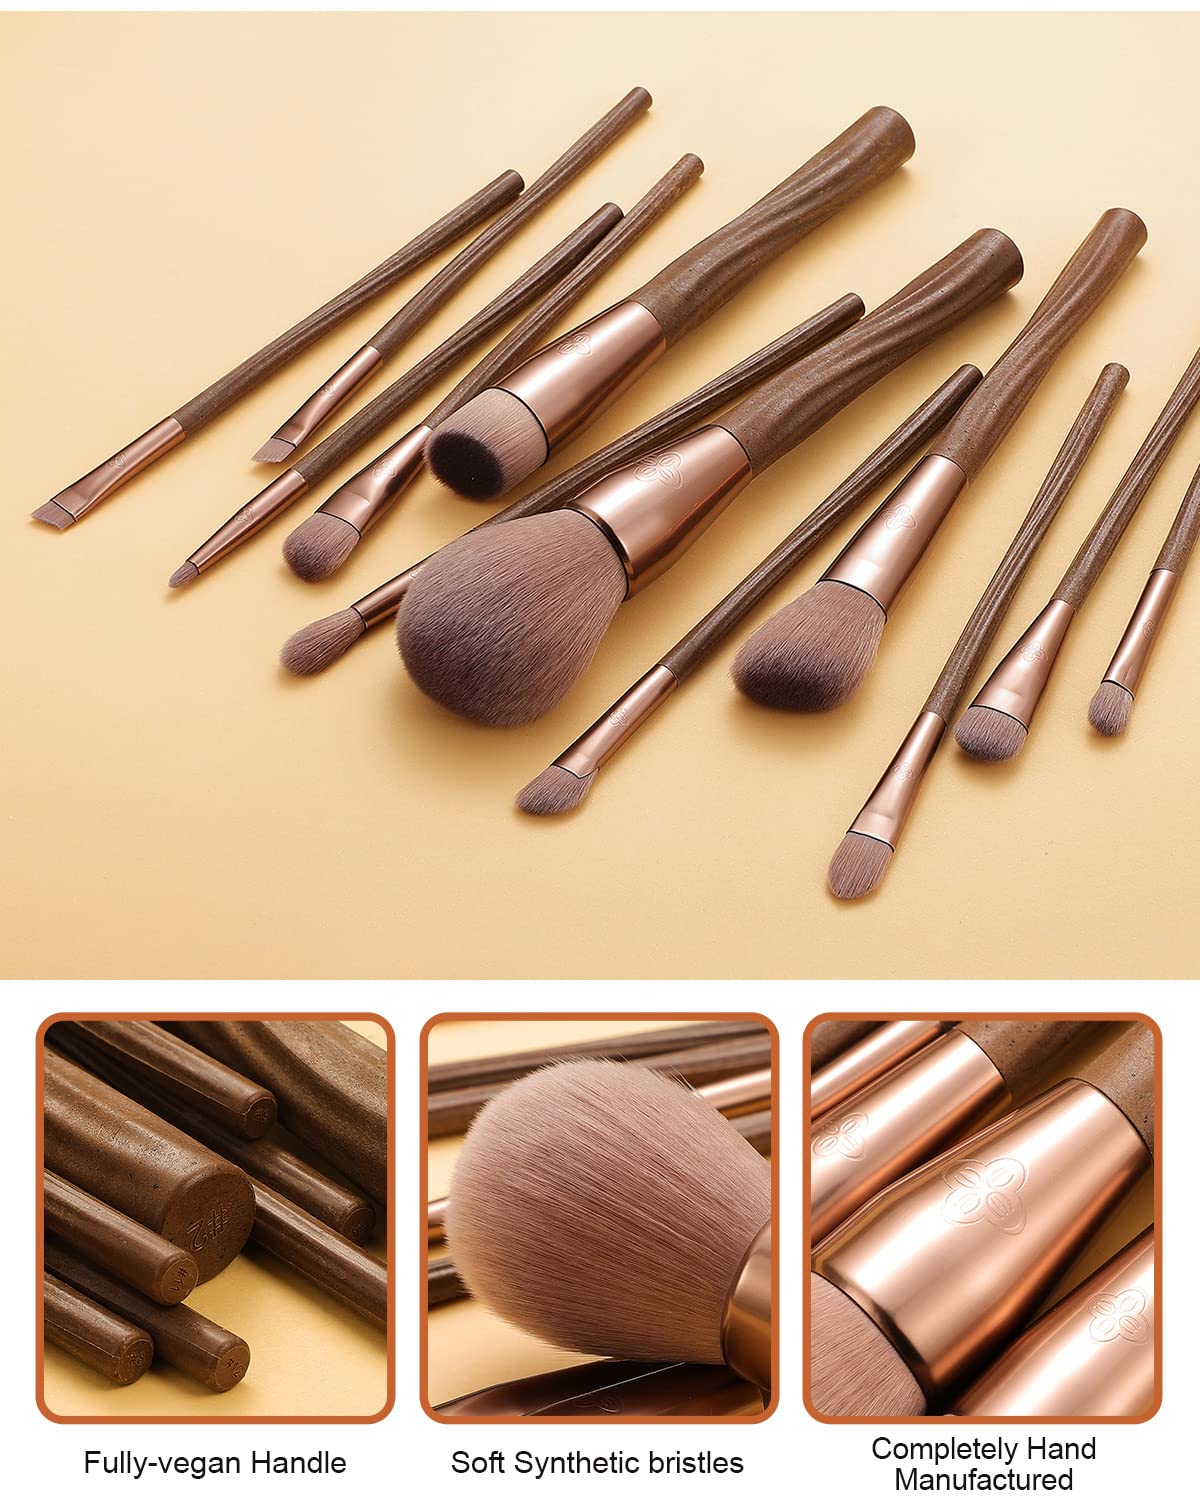 Makeup Brushes Set 12 Pcs Eigshow Professional Makeup Brushes High-end Full Face Eye Brushes Eco-friendly Vegan & Cruelty-free Makeup Brushes with Holder - Unique Handle Design(Coffee)